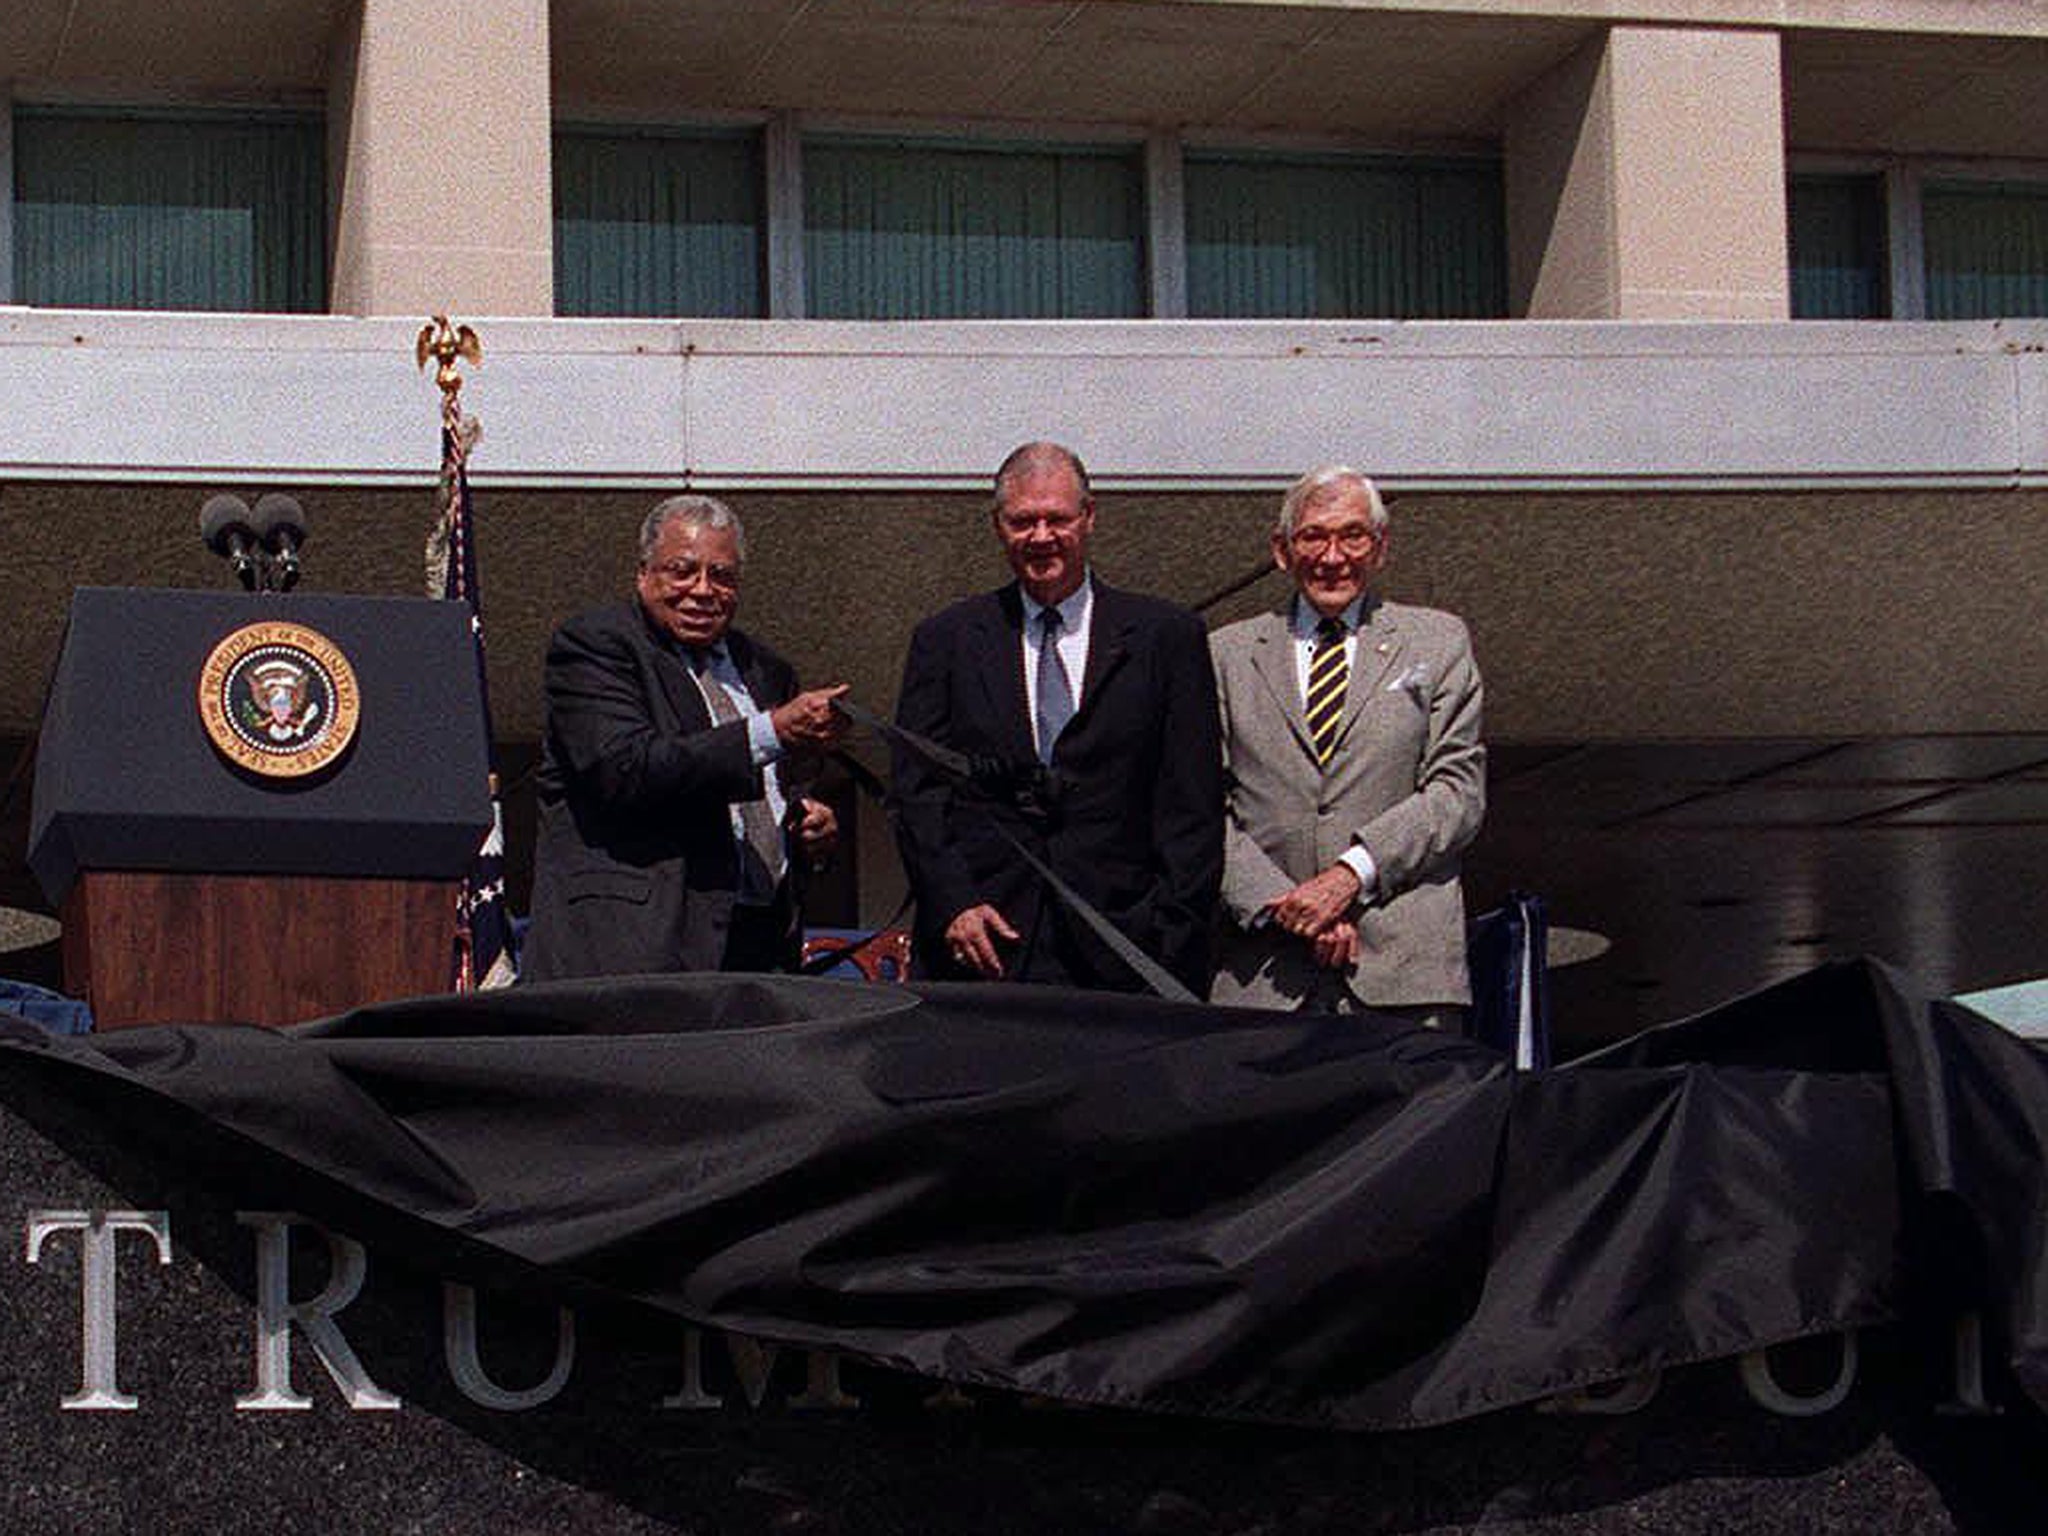 From left to right: James Earl Jones, Ike Skelton and George Elsey photographed in 2000